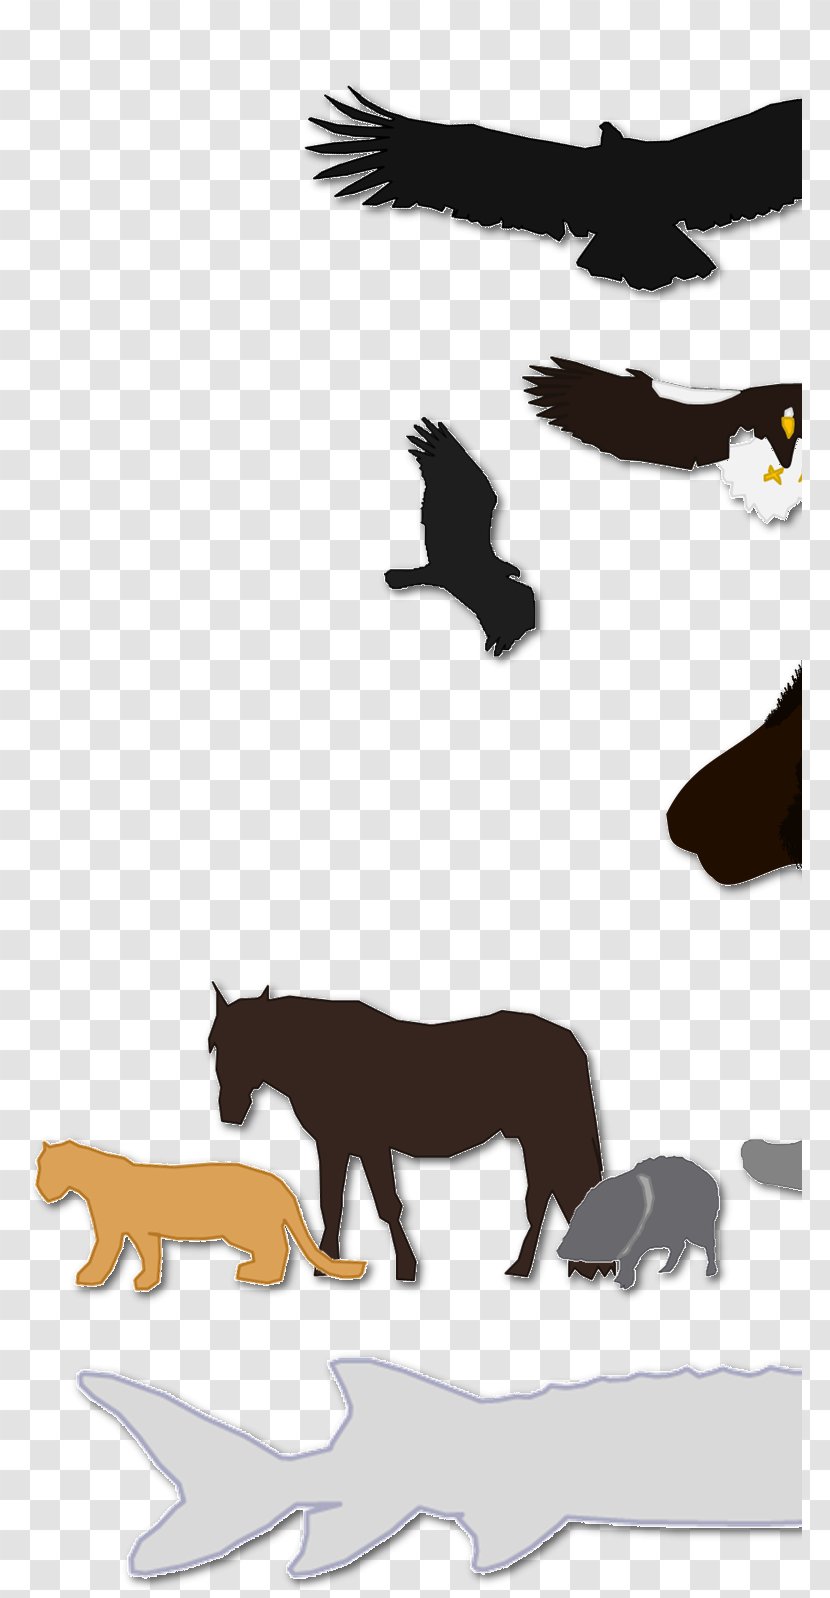 Canidae Mustang Digital Art Zoo Tycoon 2 Dog - Silhouette - Juvenile Golden Eagle Vs Bald Transparent PNG